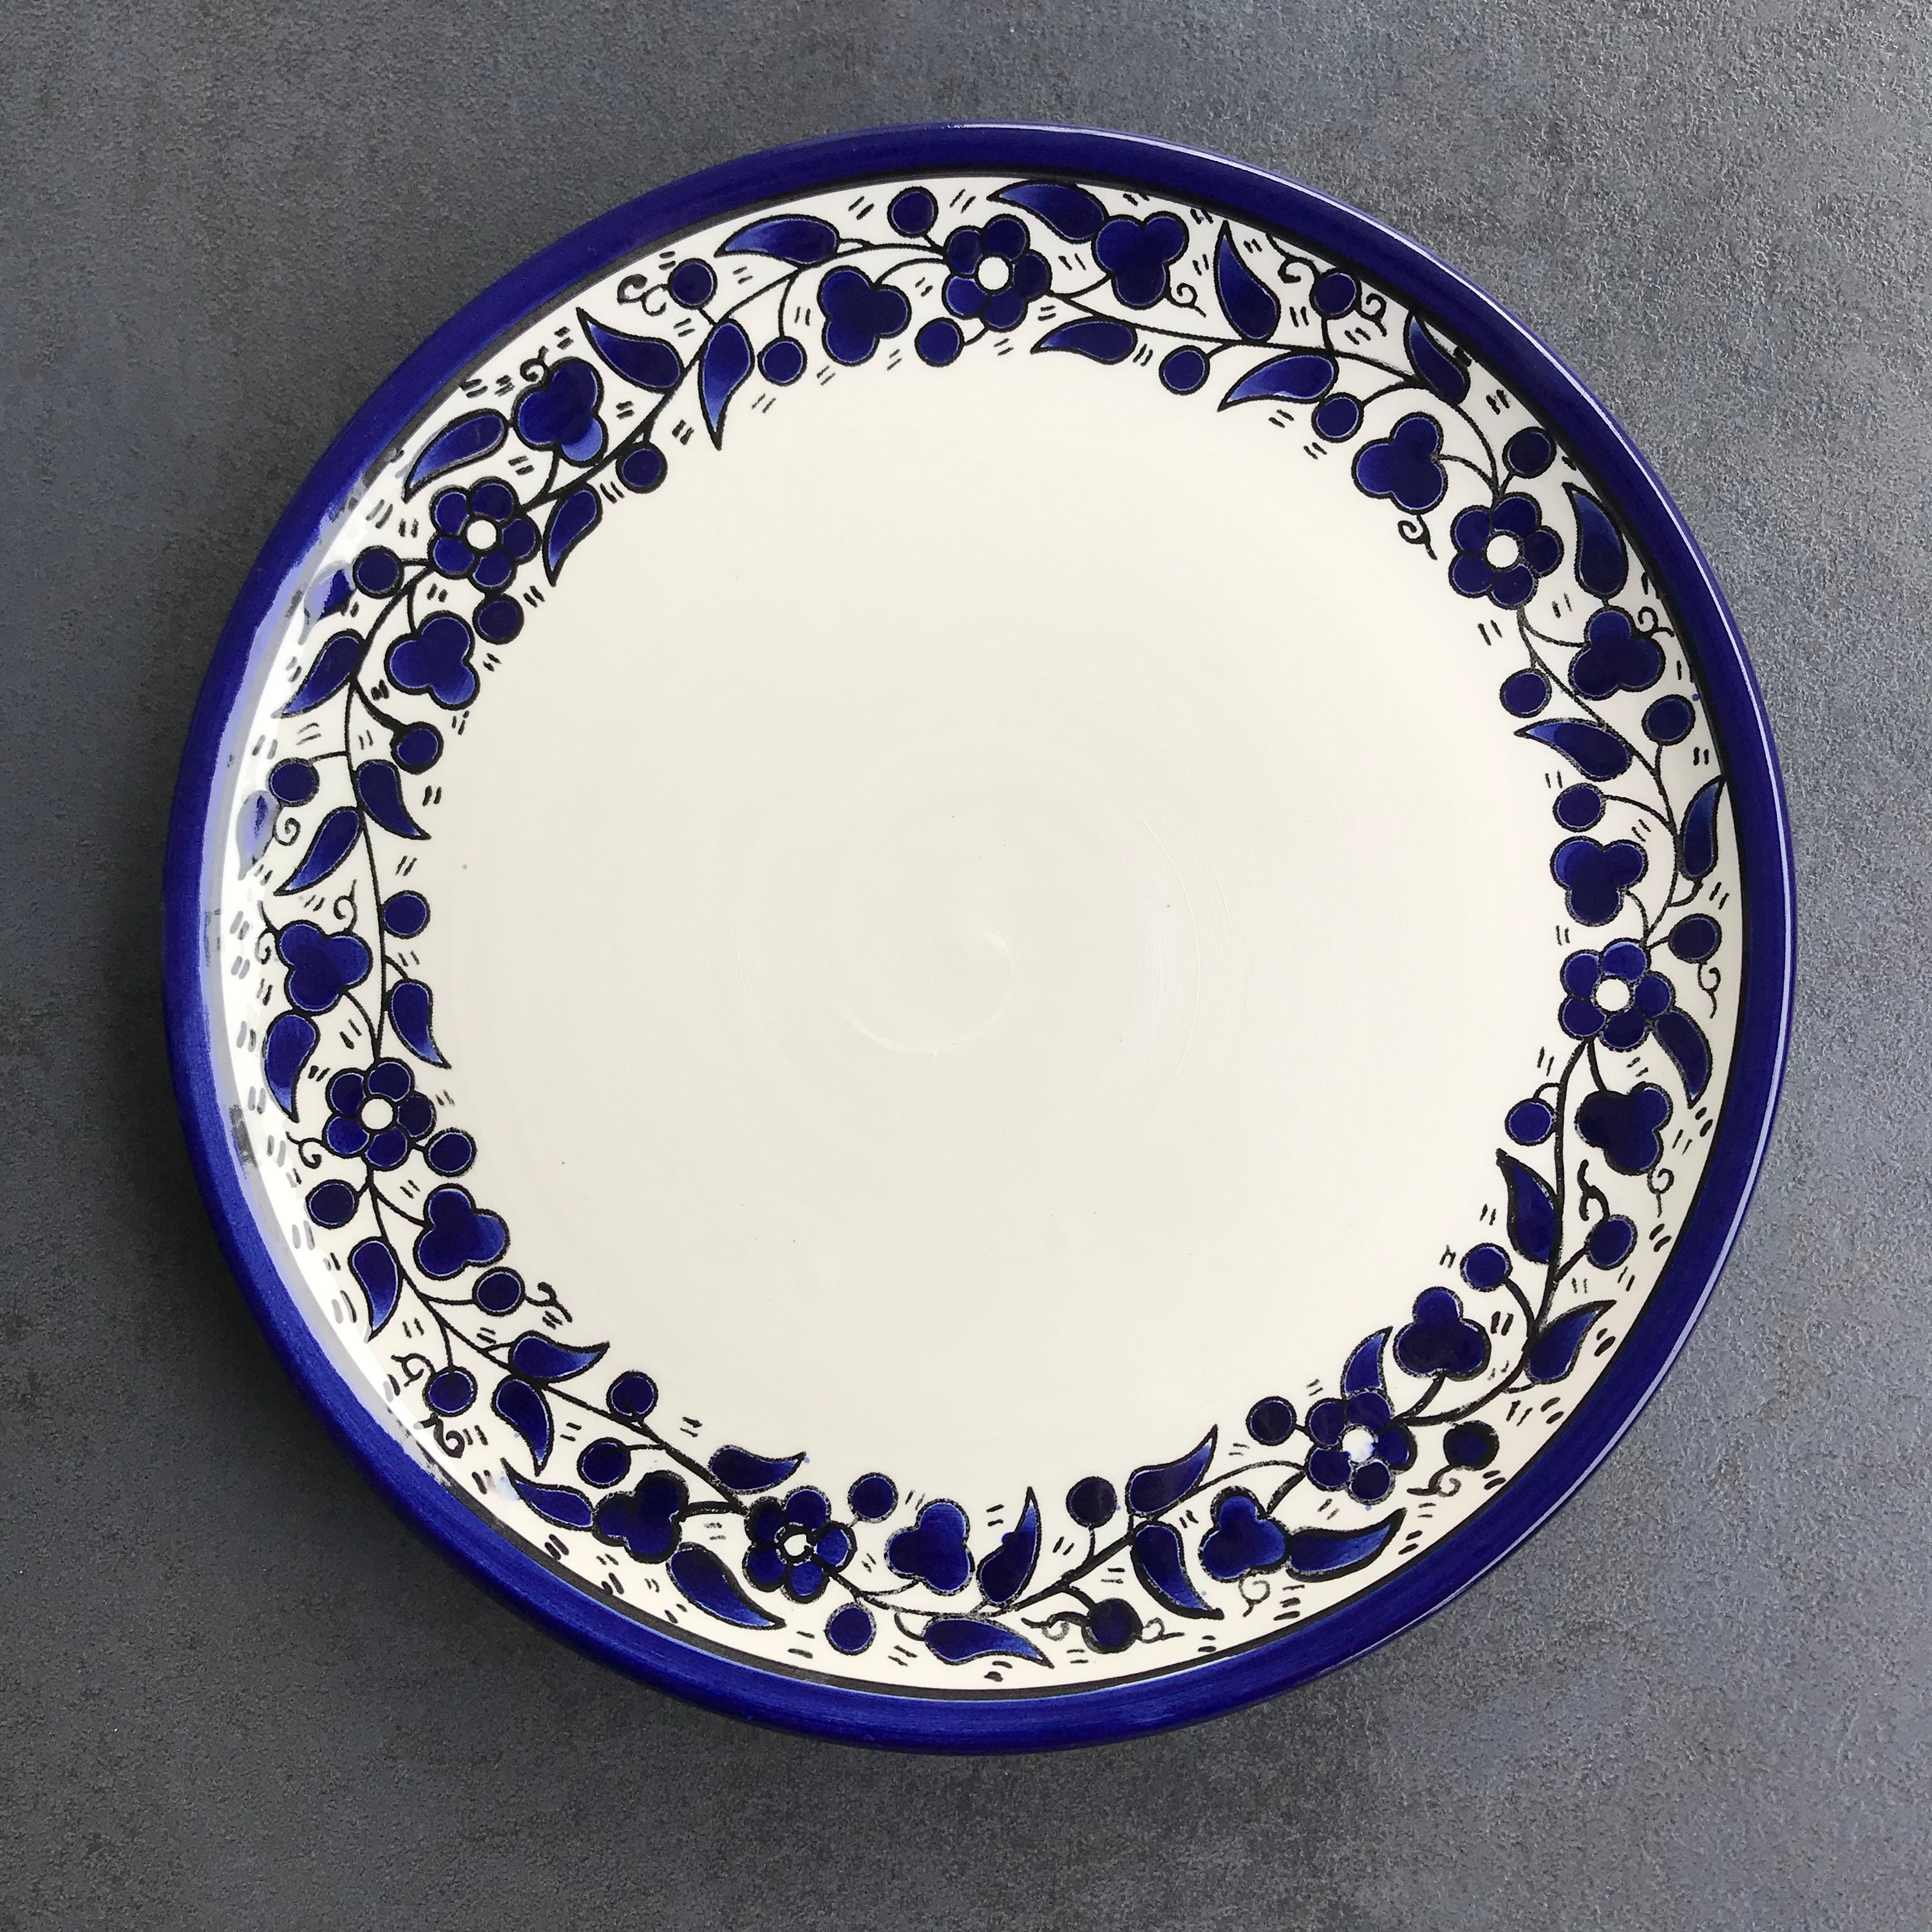 Buy Crockery Set With Hand-painted Blue and White Flowers, Table Service:  Large and Small Plate Soup/cereal Bowl for 2, 4 or 6 People Online in India  